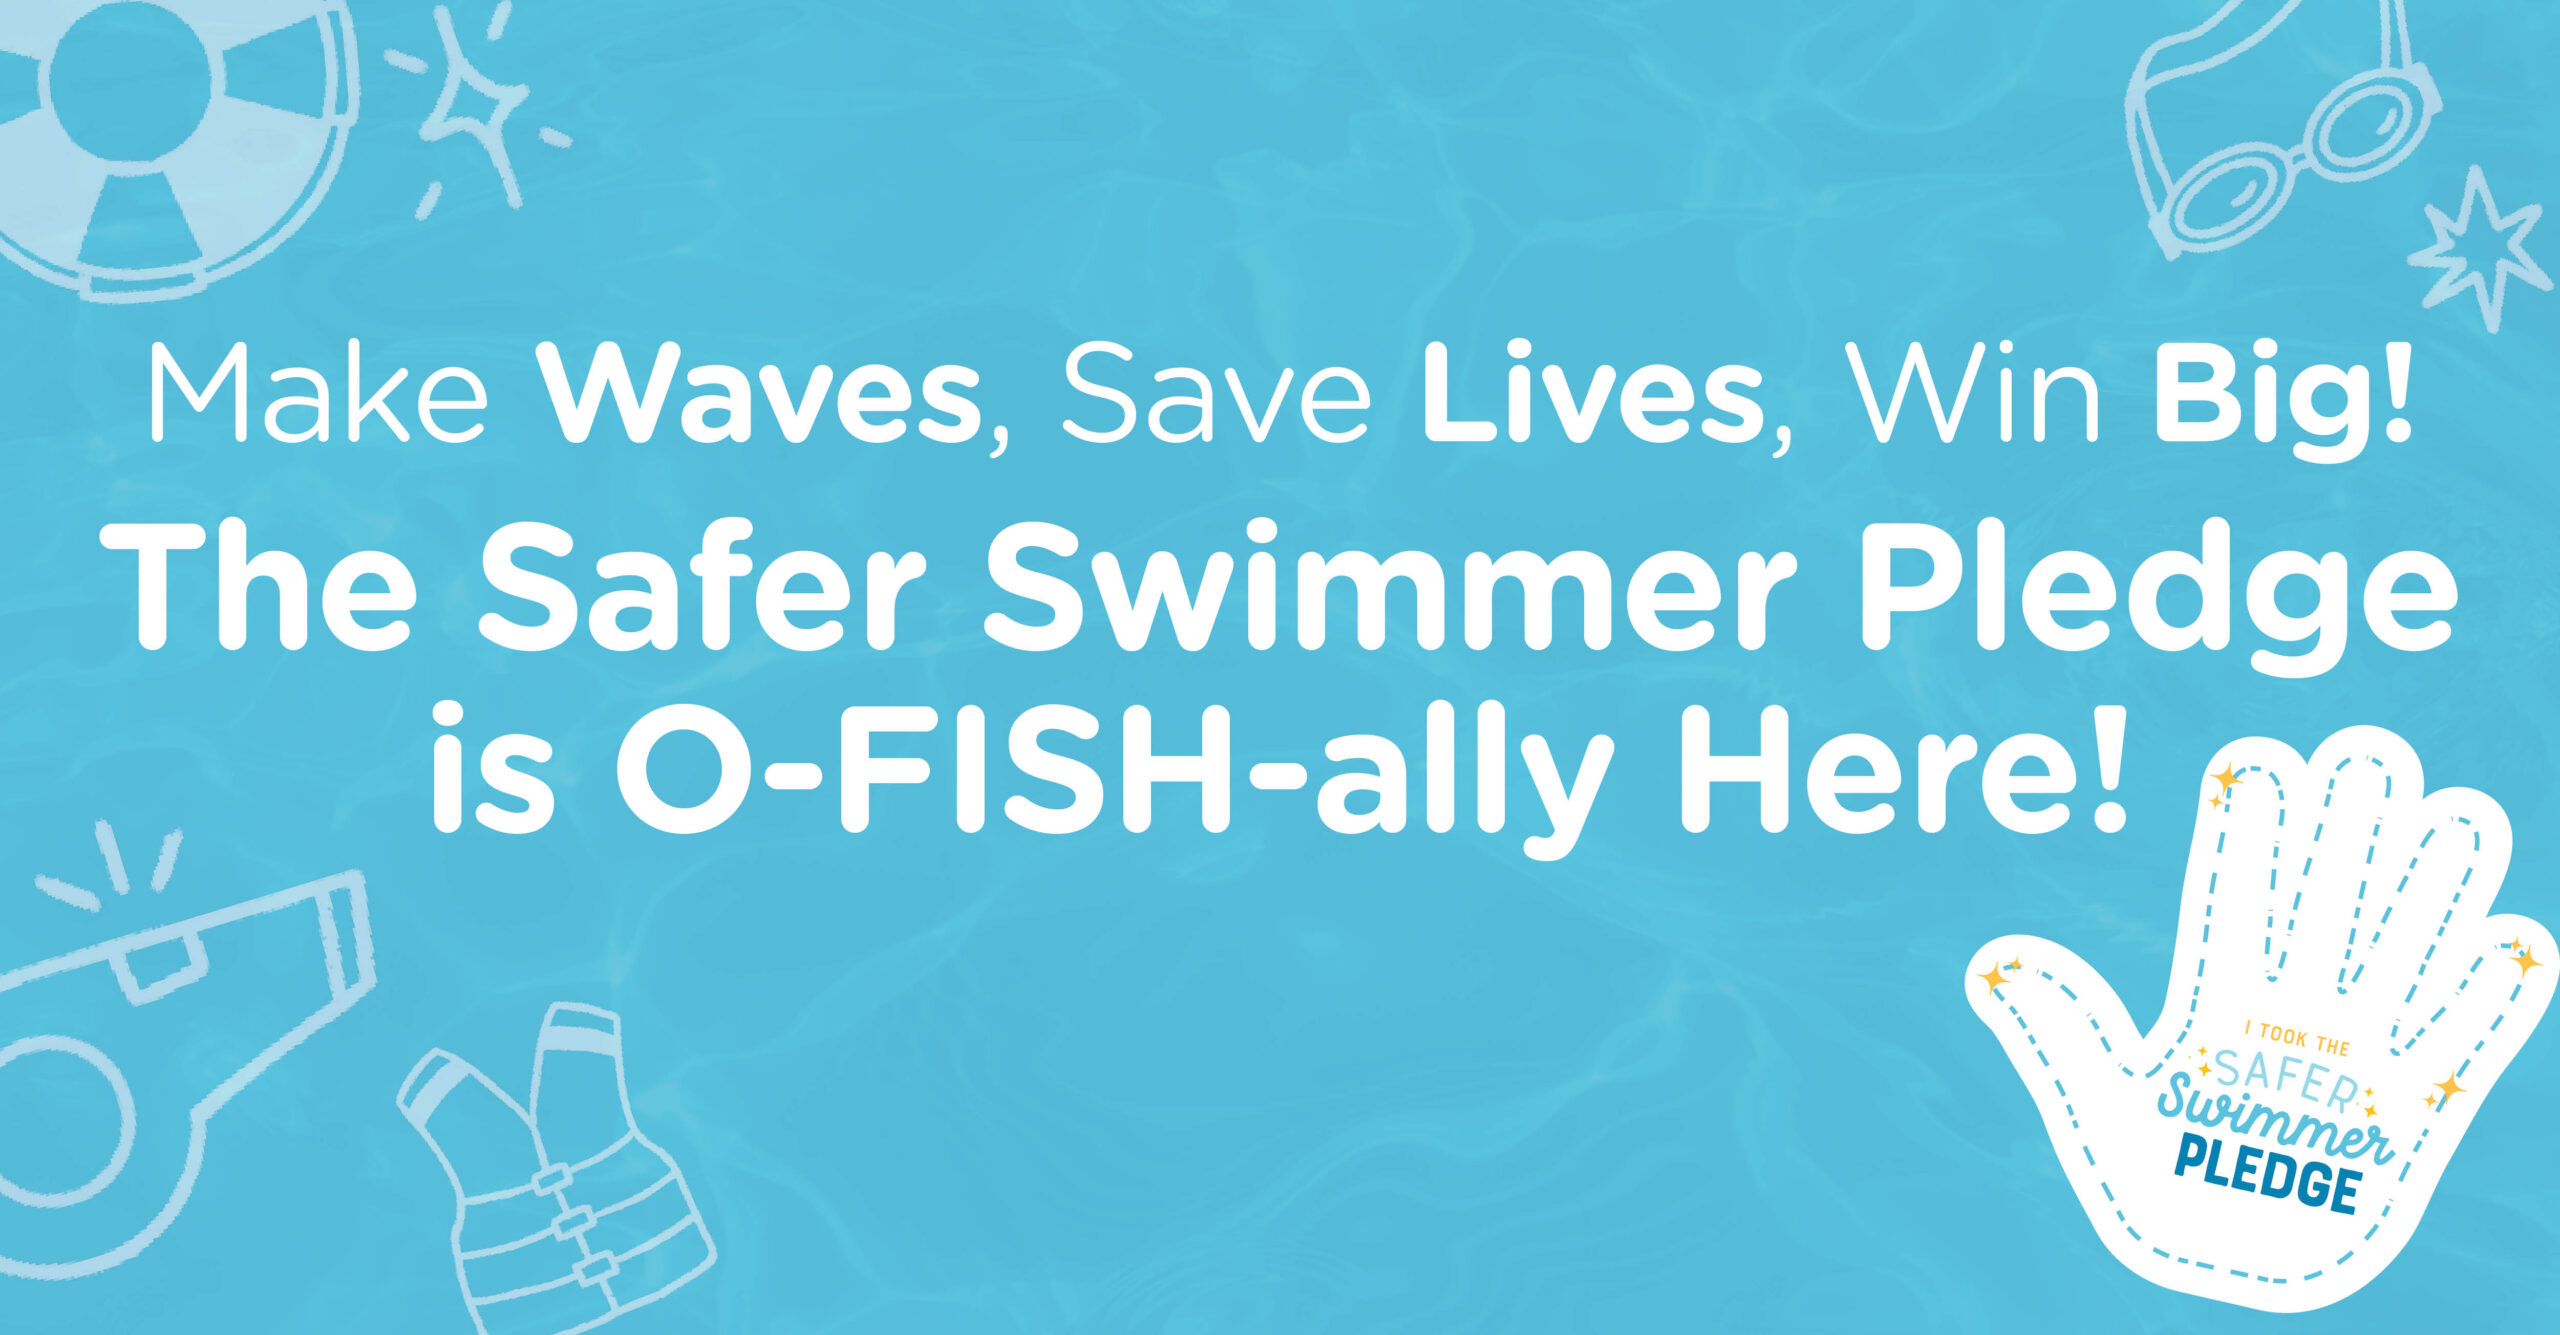 Make Waves. Save Lives. Win Big! The Safer Swimmer Pledge is O-FISH-ally Here!